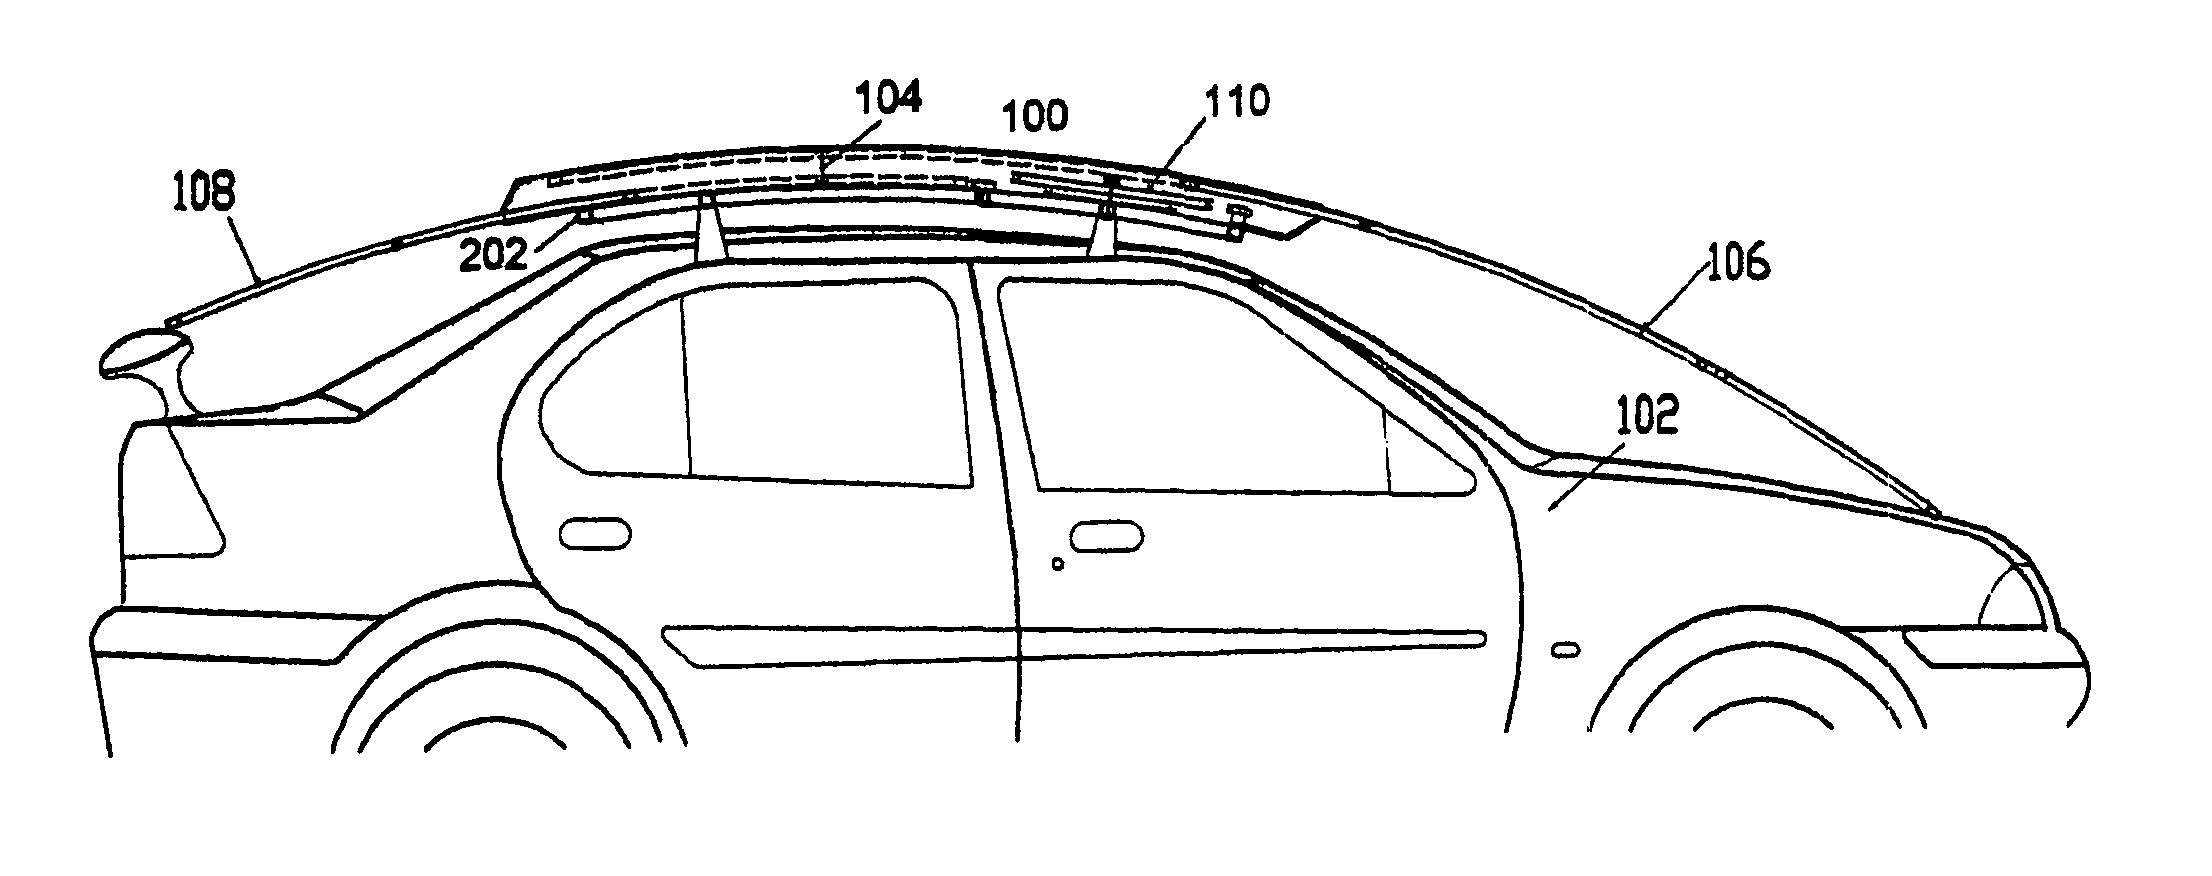 Retractable vehicle shade for tropical and cold climates